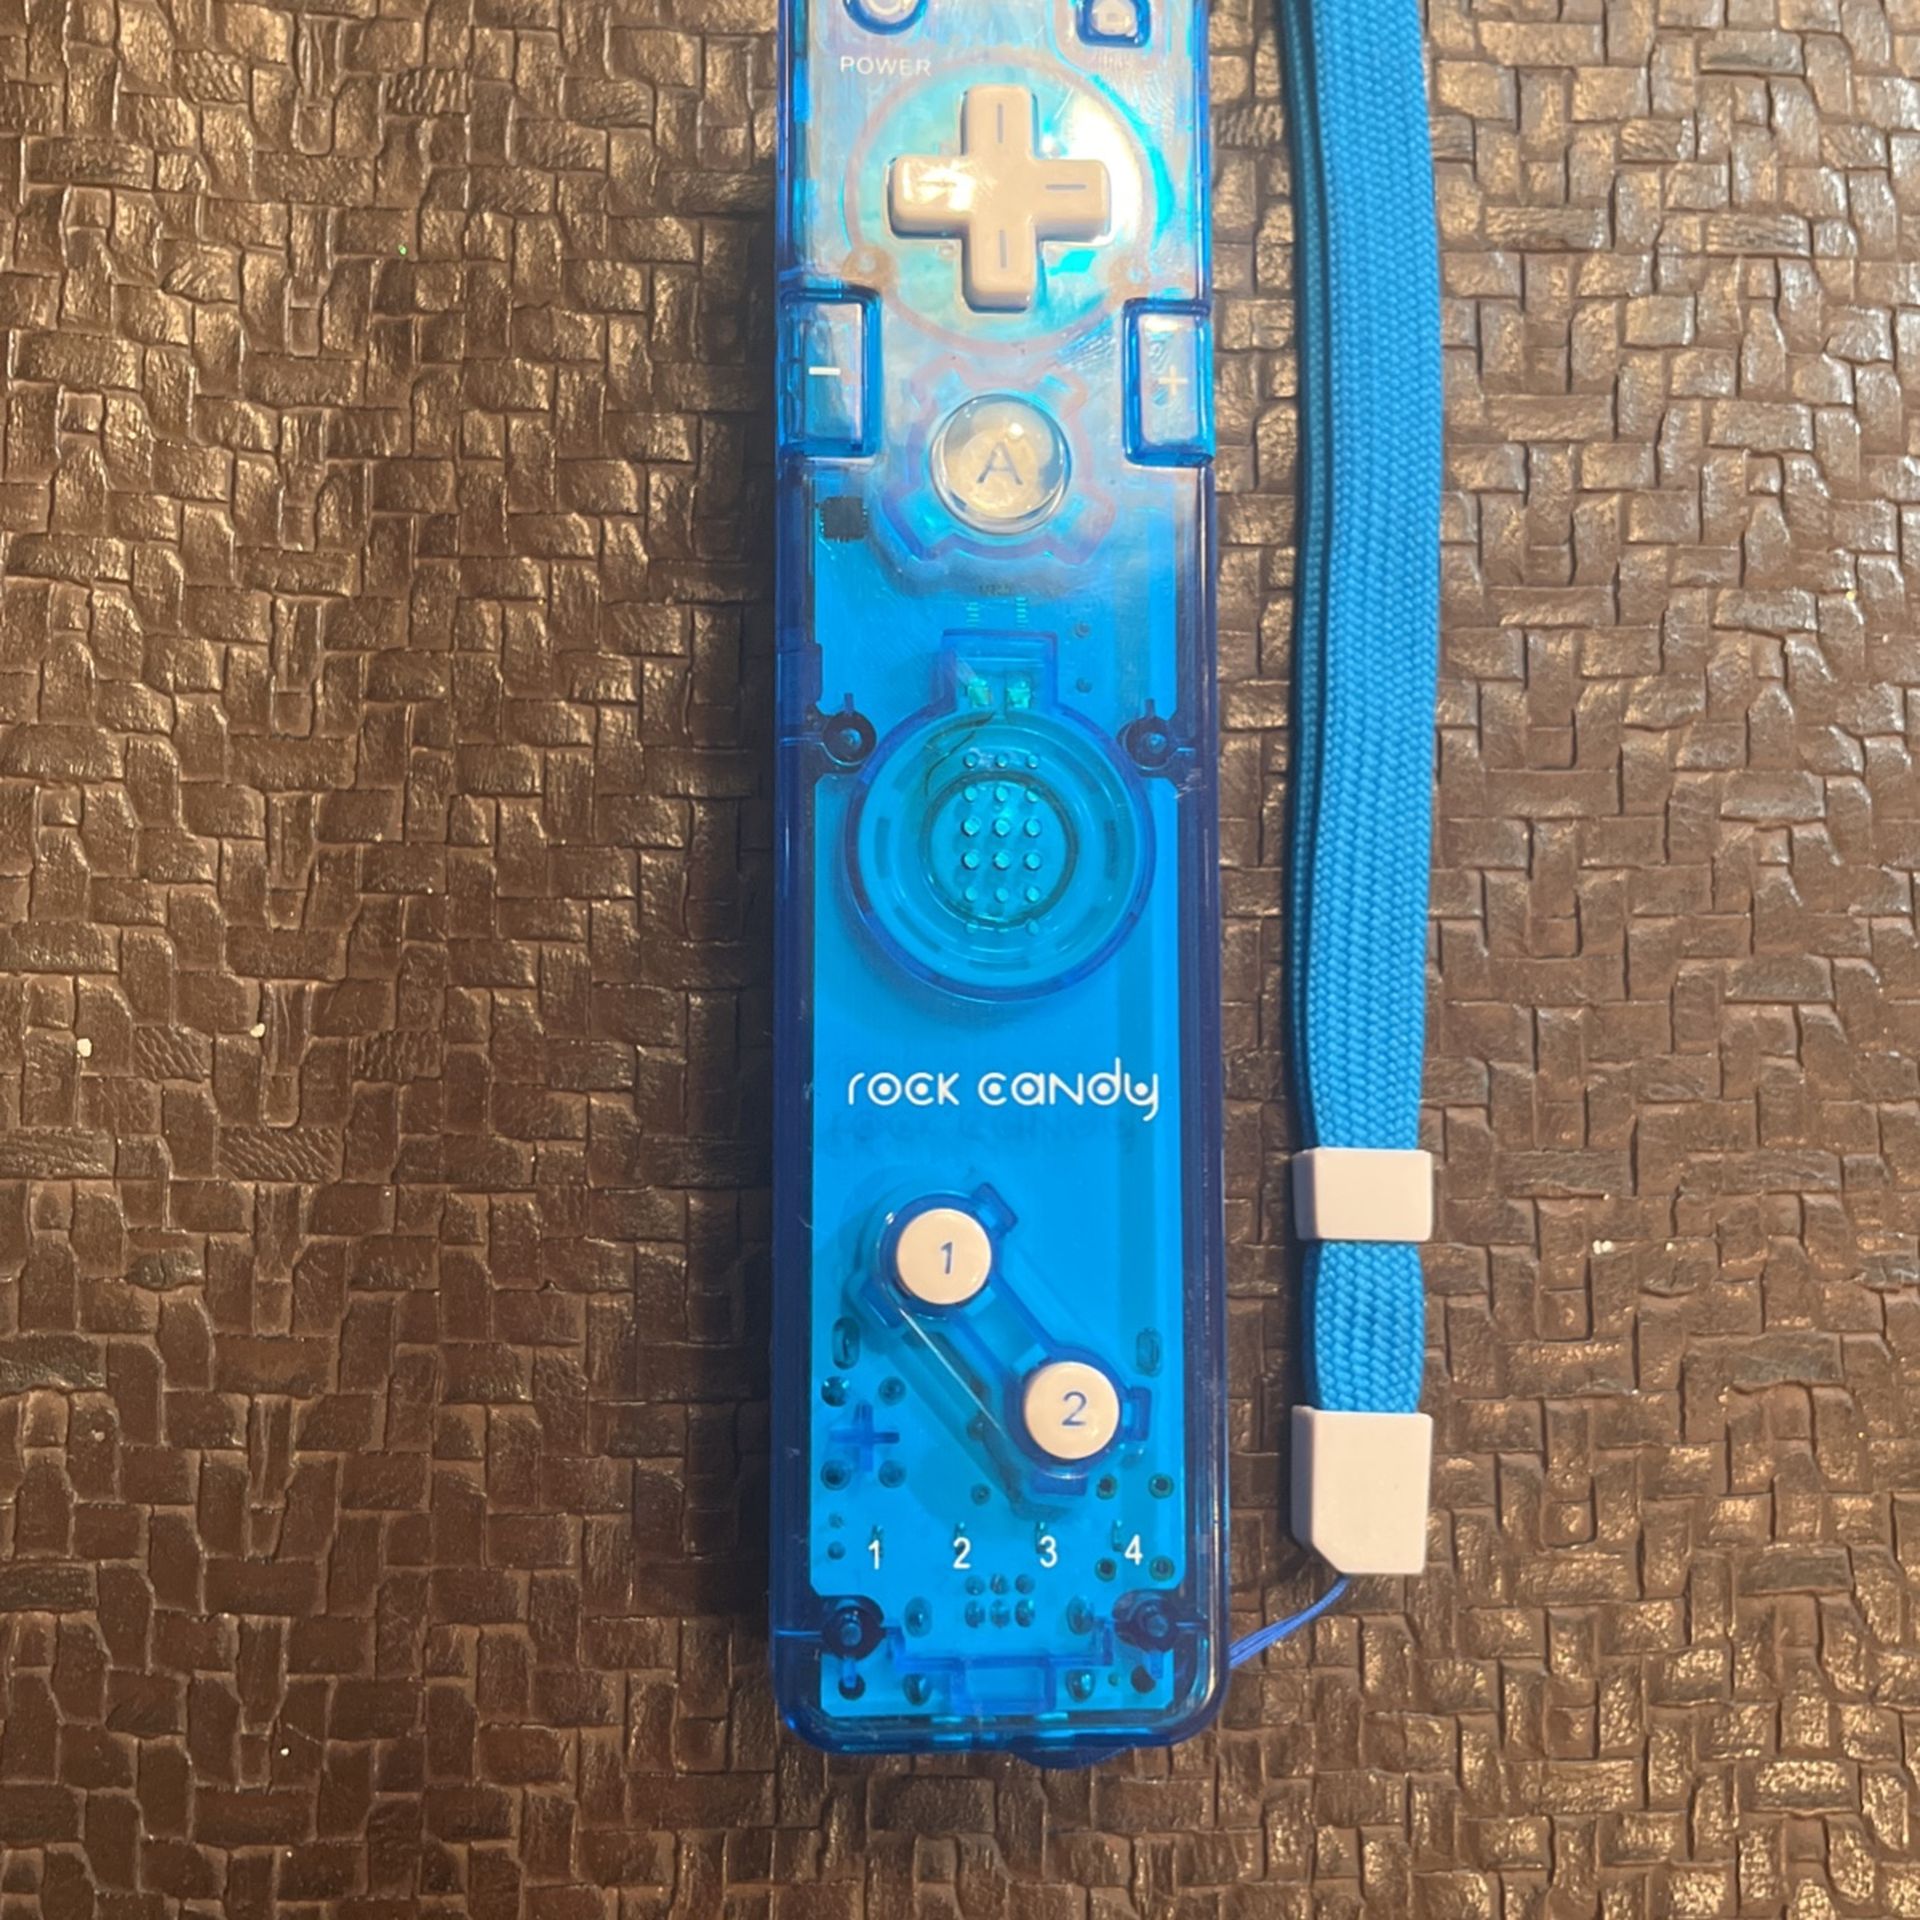 Blue ROCK CANDY Remote Controller Nintendo Wii w/ Wrist Strap Tested Working